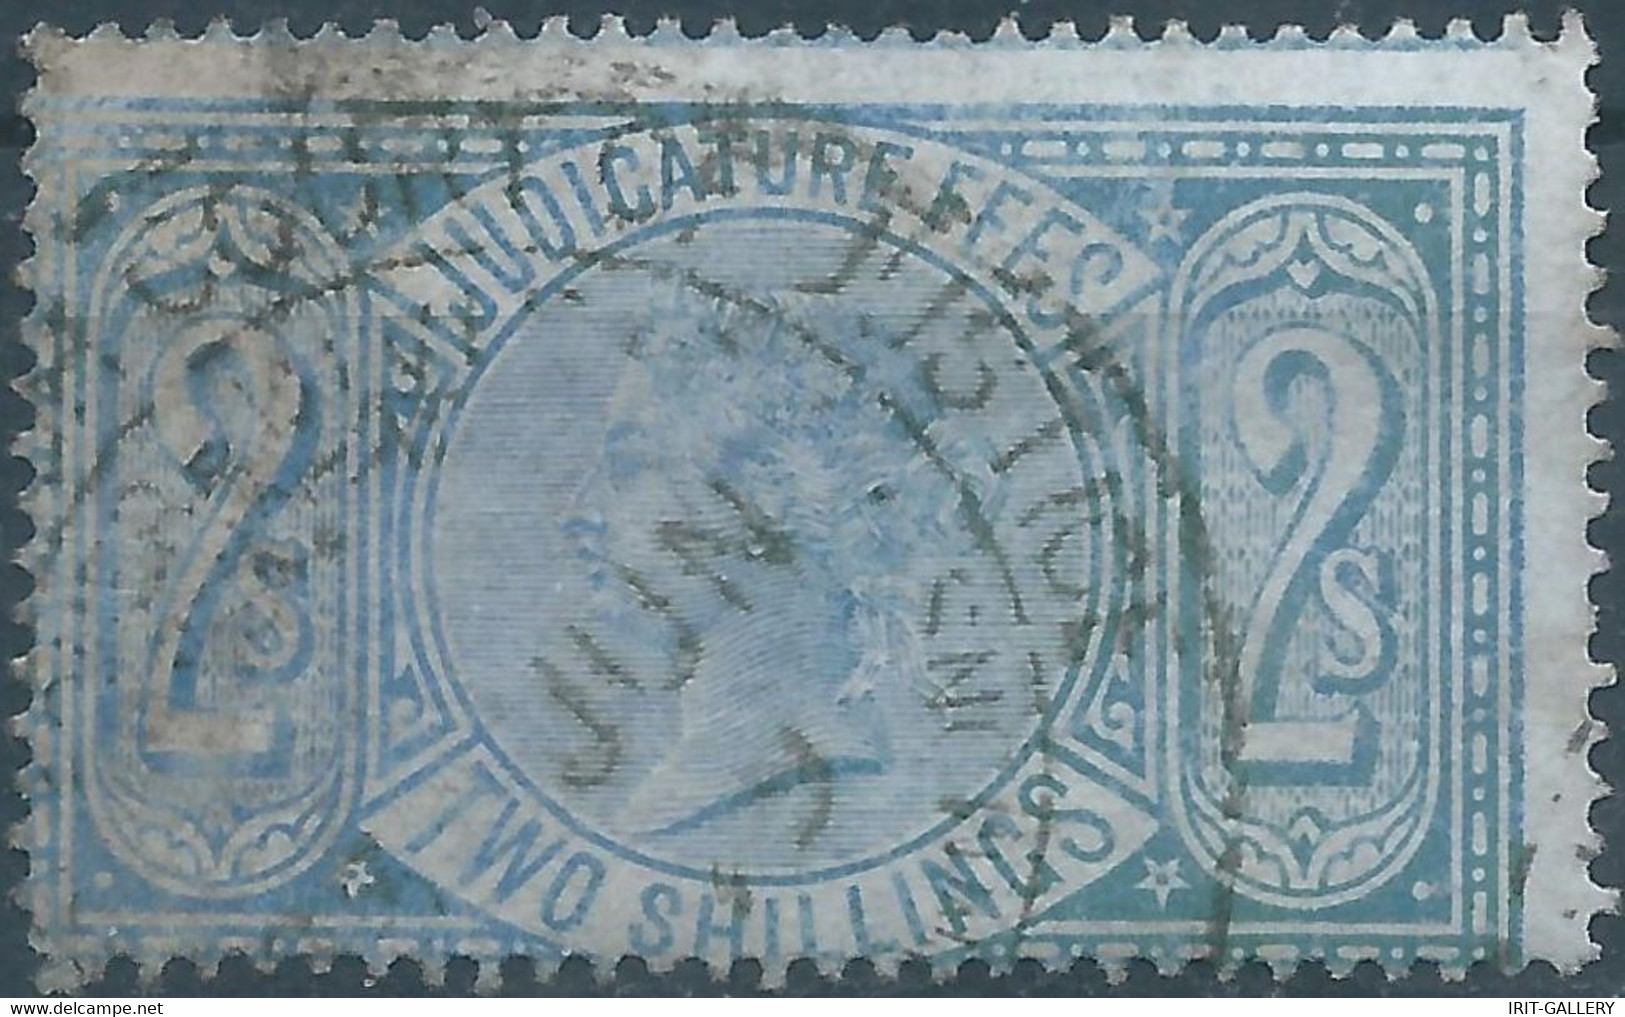 Great Britain-ENGLAND,Queen Victoria,1880-1900 Revenue Stamp Tax Fiscal,JUDICATURE FEES,2 Shillings,Used - Fiscali